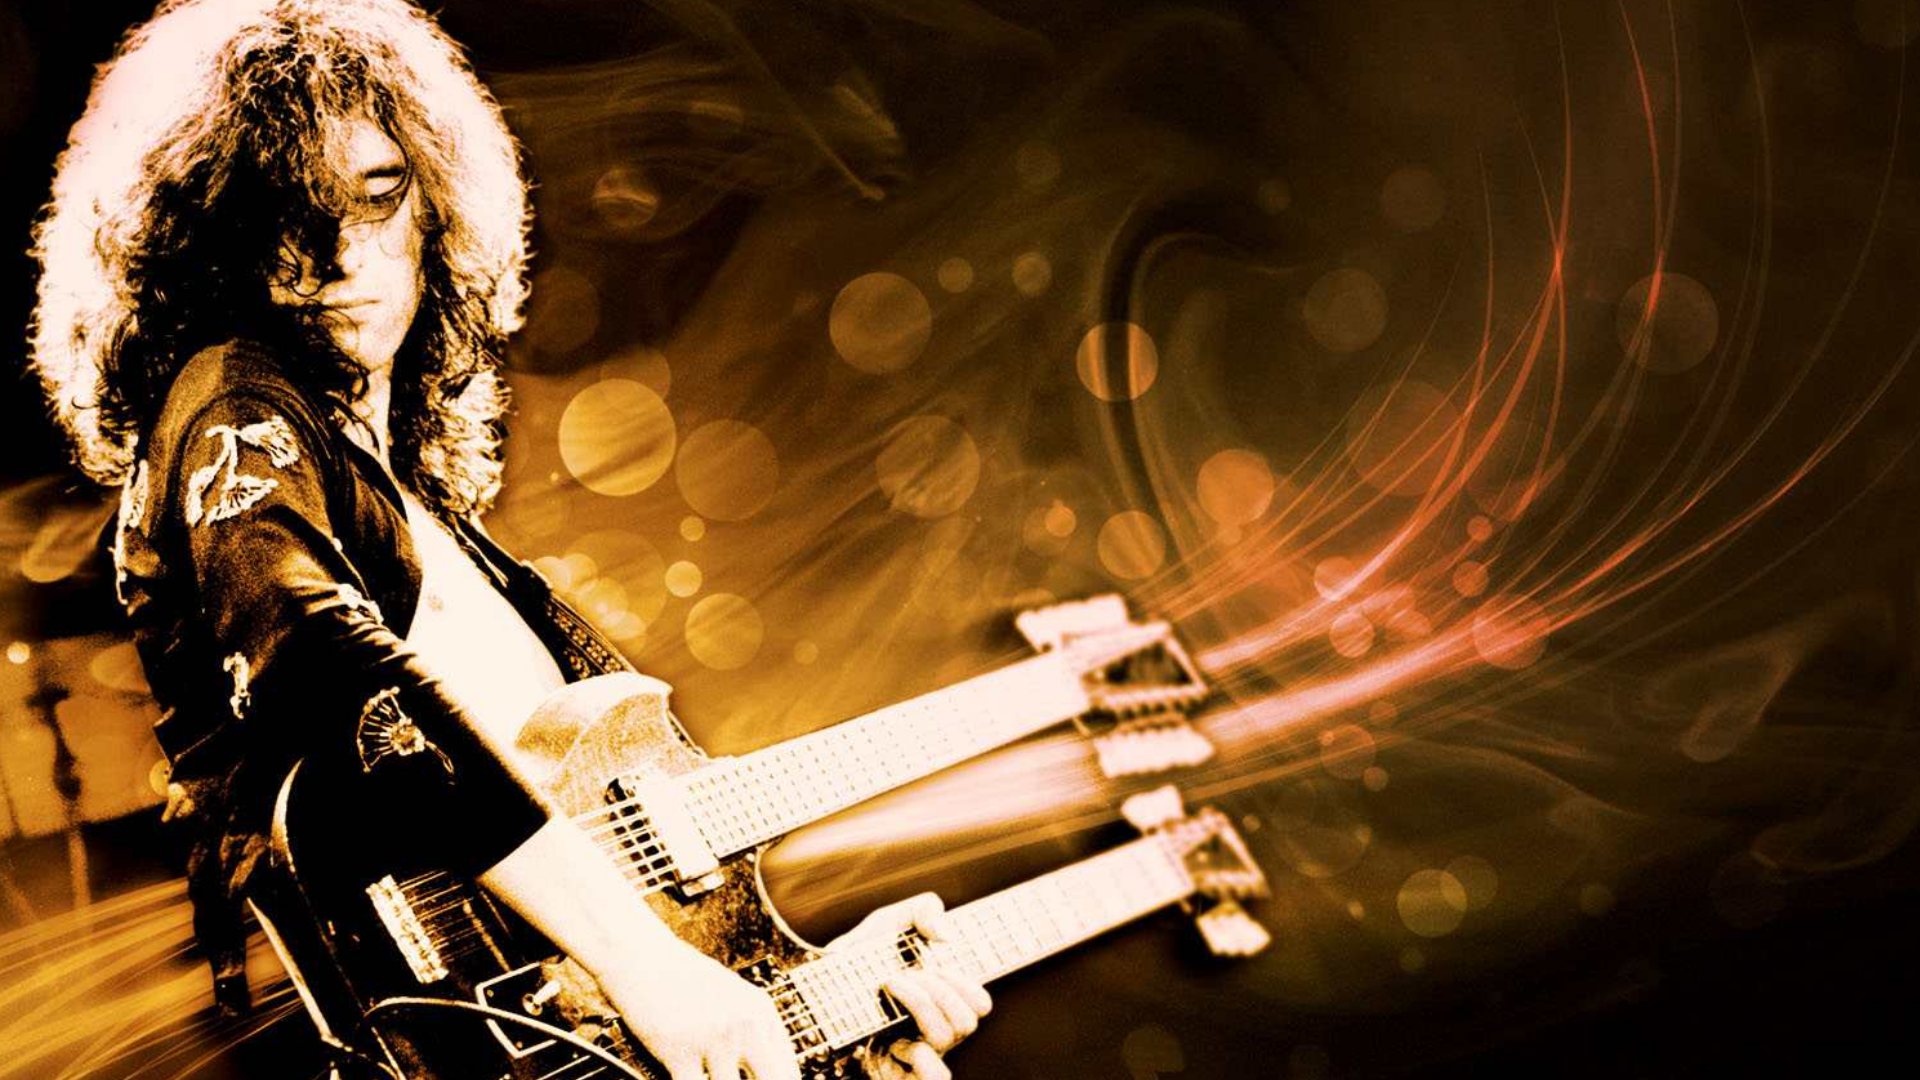  jimmy page robert plant album covers guitars wallpaper background